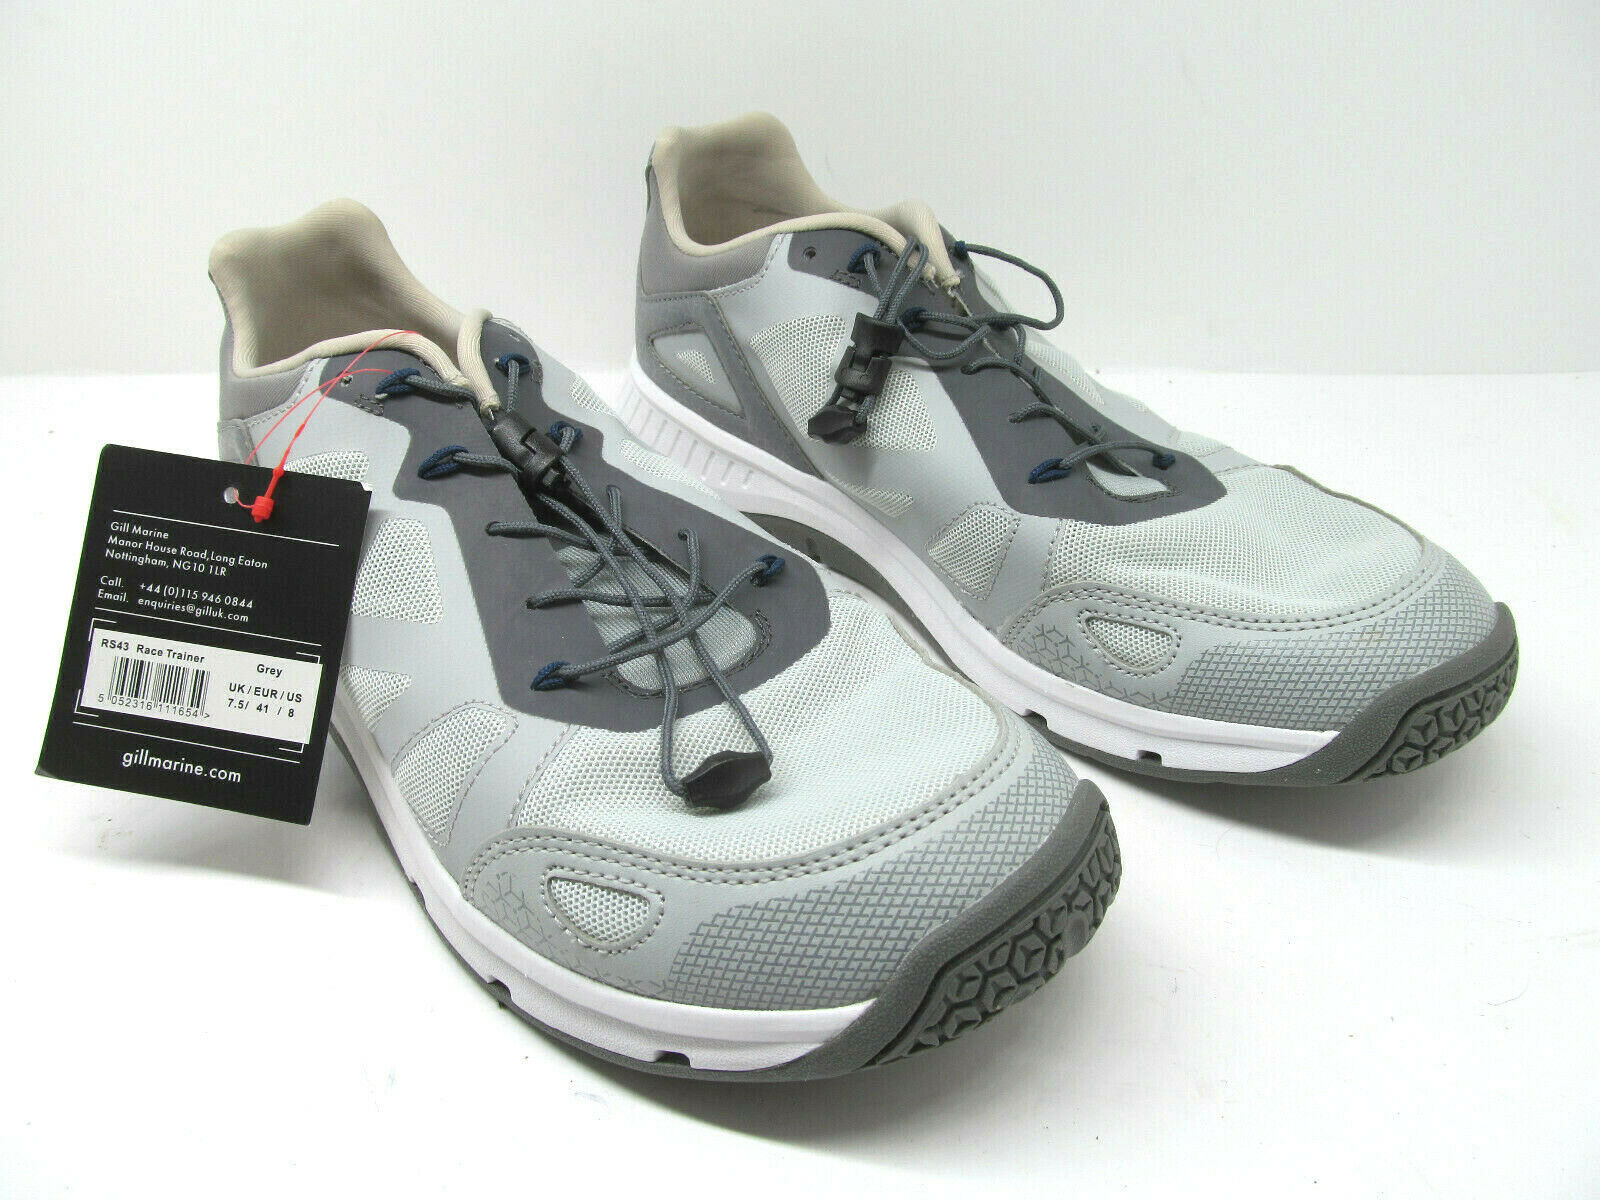 Gill Marine Race Trainers Mens Light Gray Non-Slip Boat Shoes Size US 8 ...